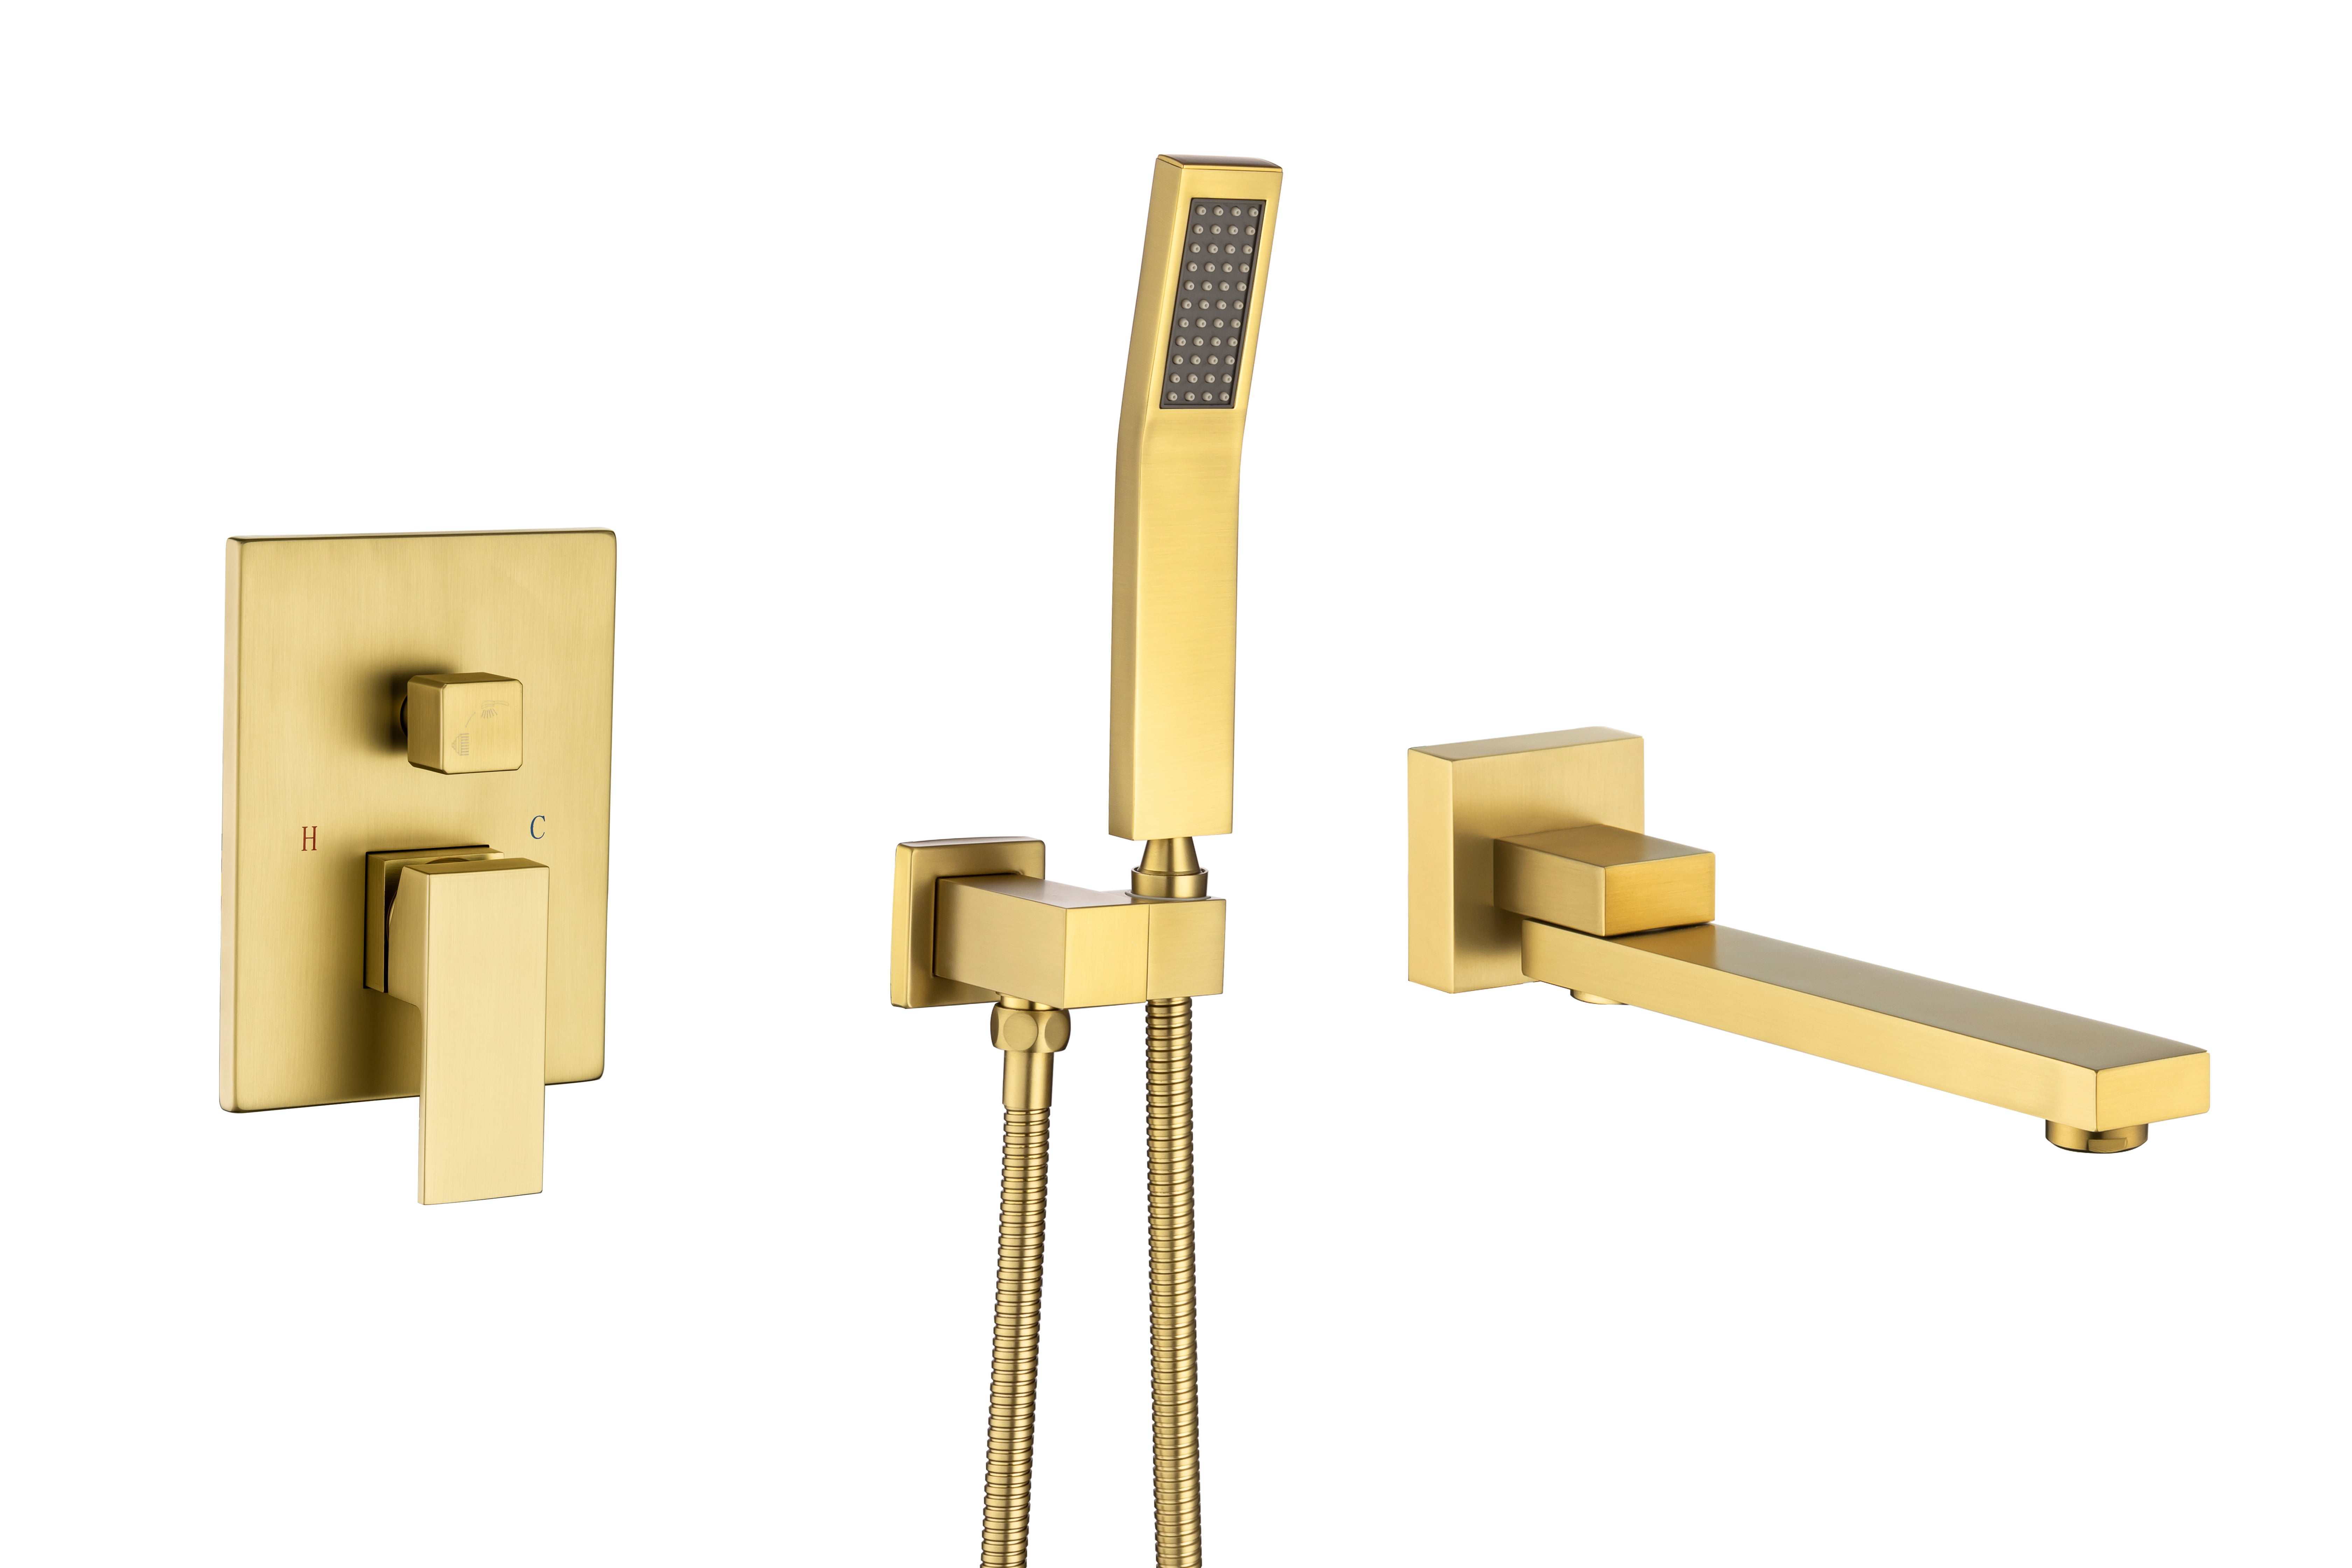 Brass Brushed Gold Bath Tub Shower SPA Spout 180 Degree Swivel Basin Tap Faucet